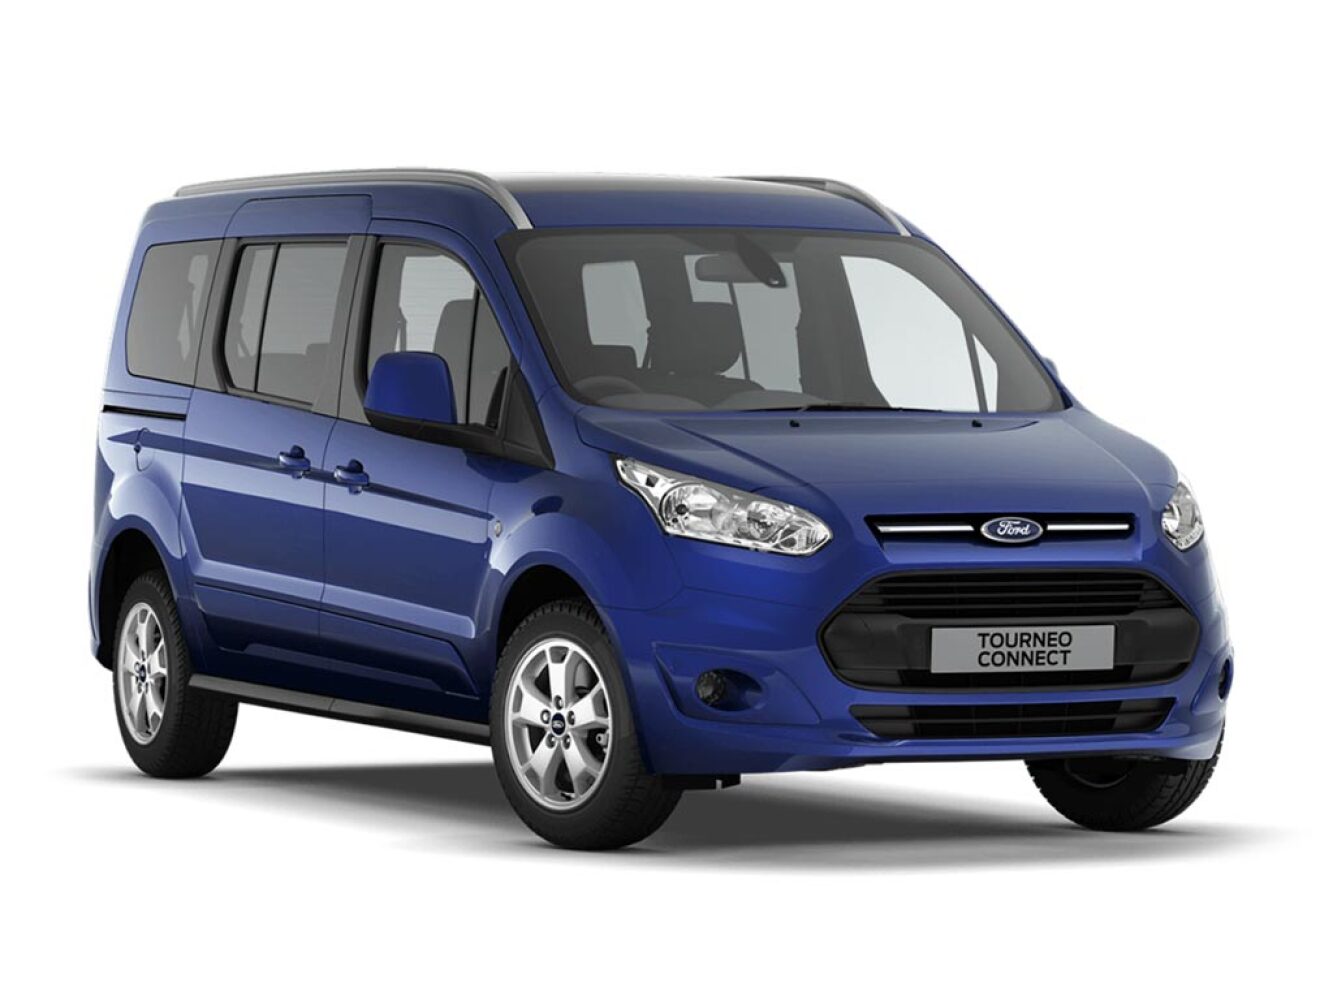 New Ford Grand Tourneo Connect 1.5 Tdci 120 Zetec 5Dr